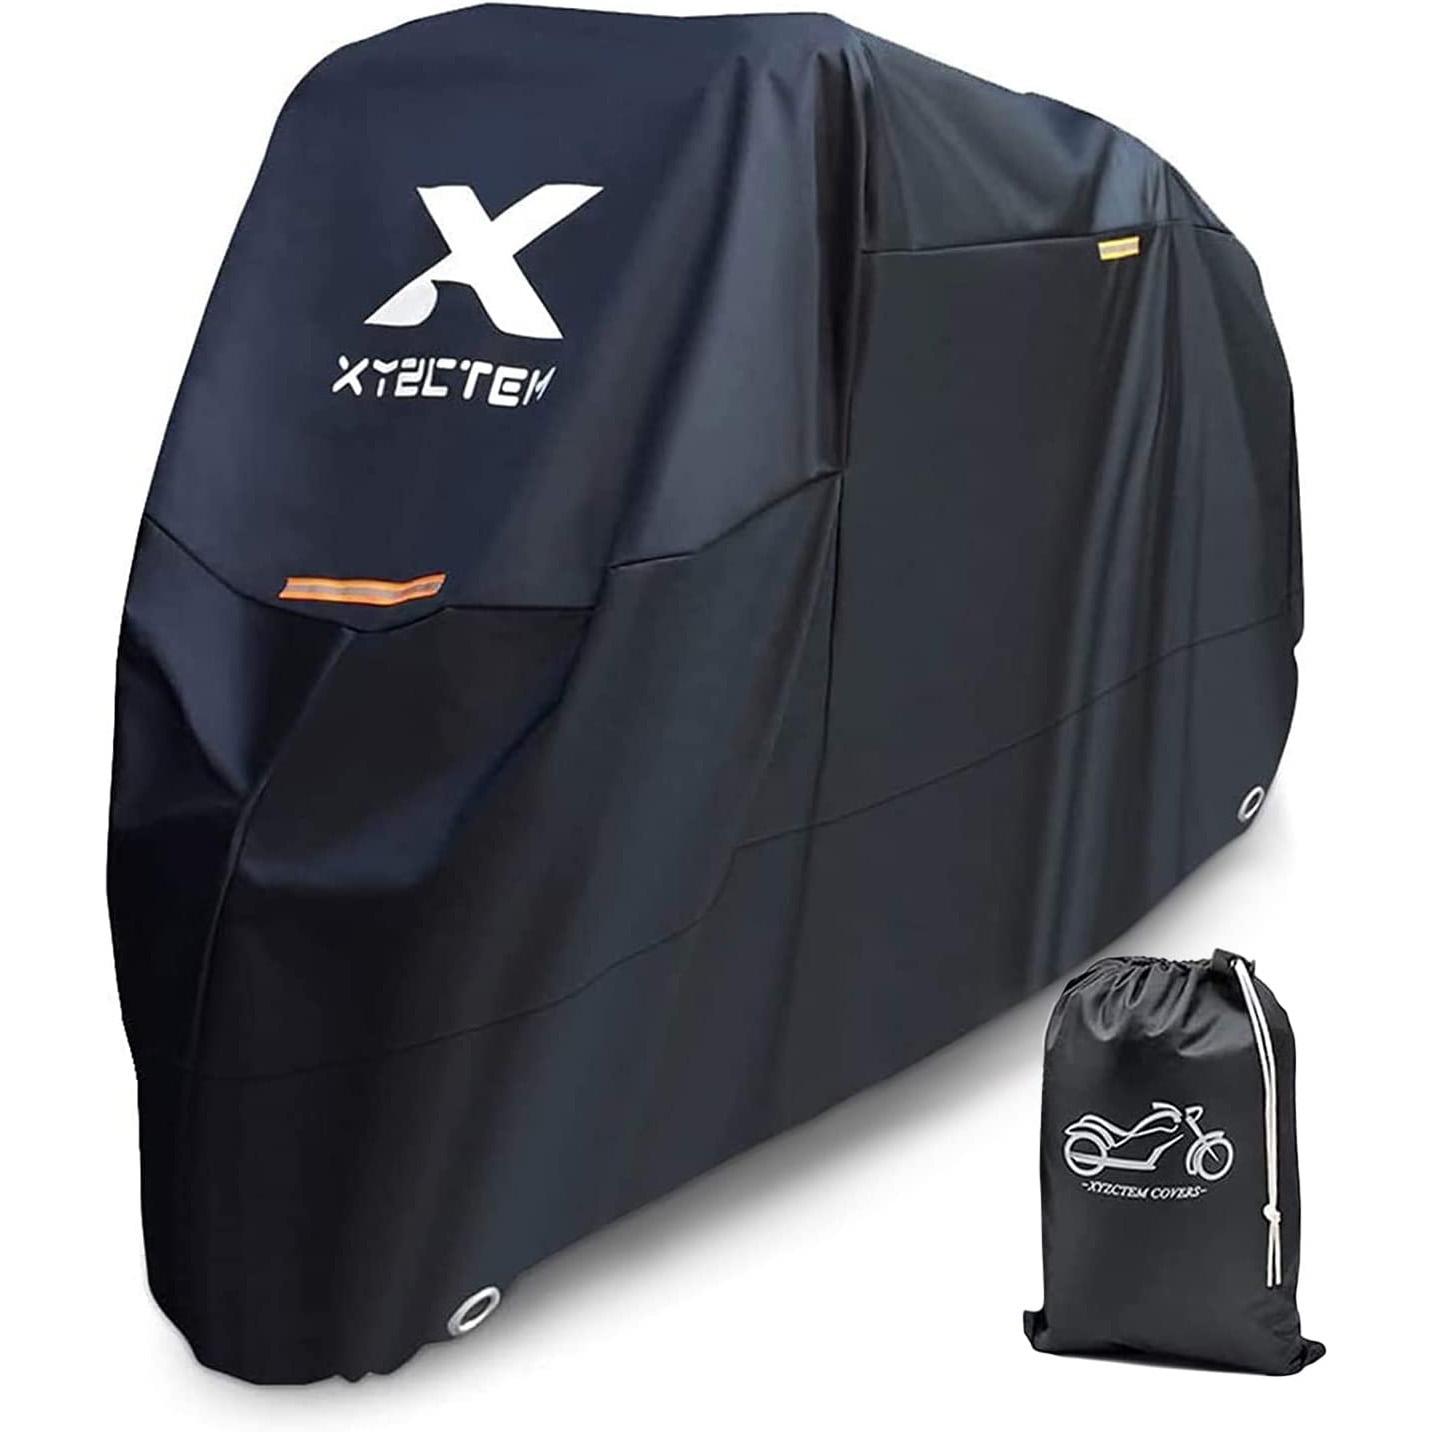 Waterproof Outdoor Motorcycle Cover for $8.96 Shipped